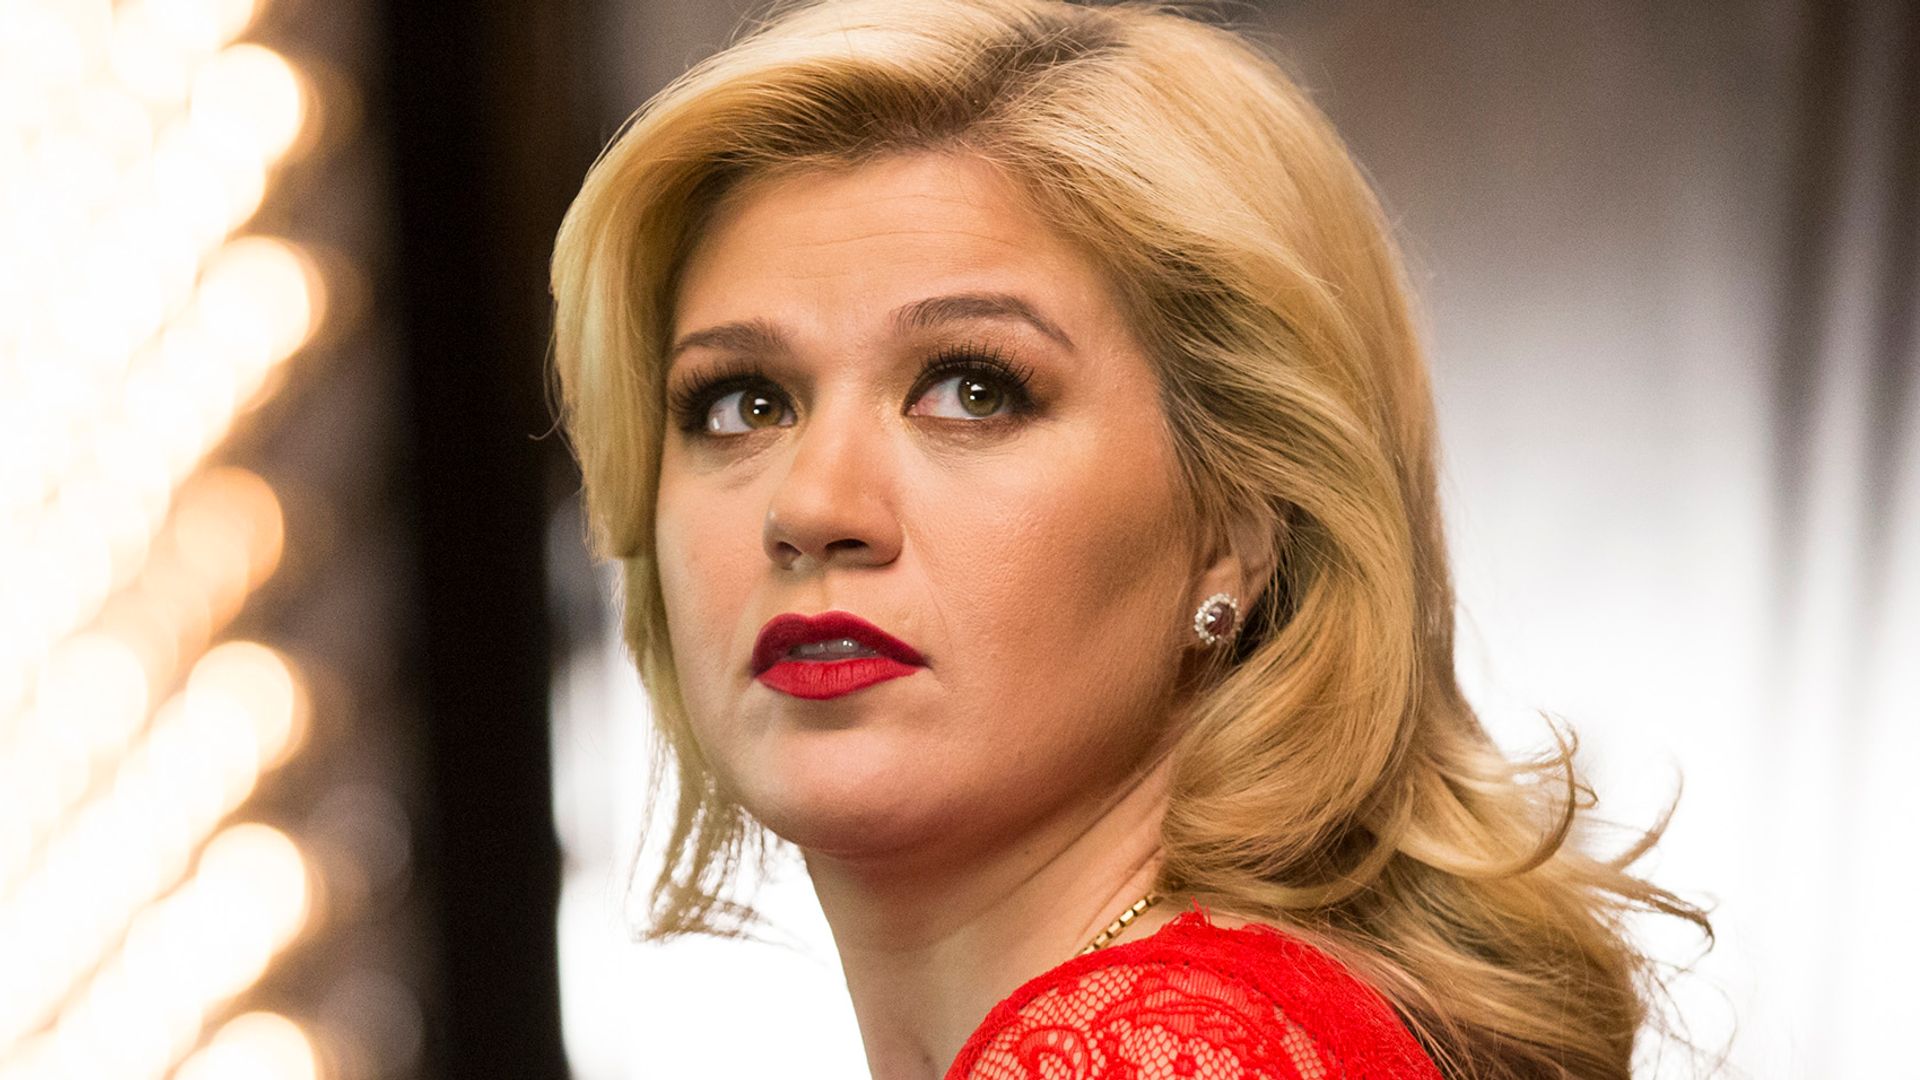 Kelly Clarkson in a red lace dress and red lipstick looking into the distance